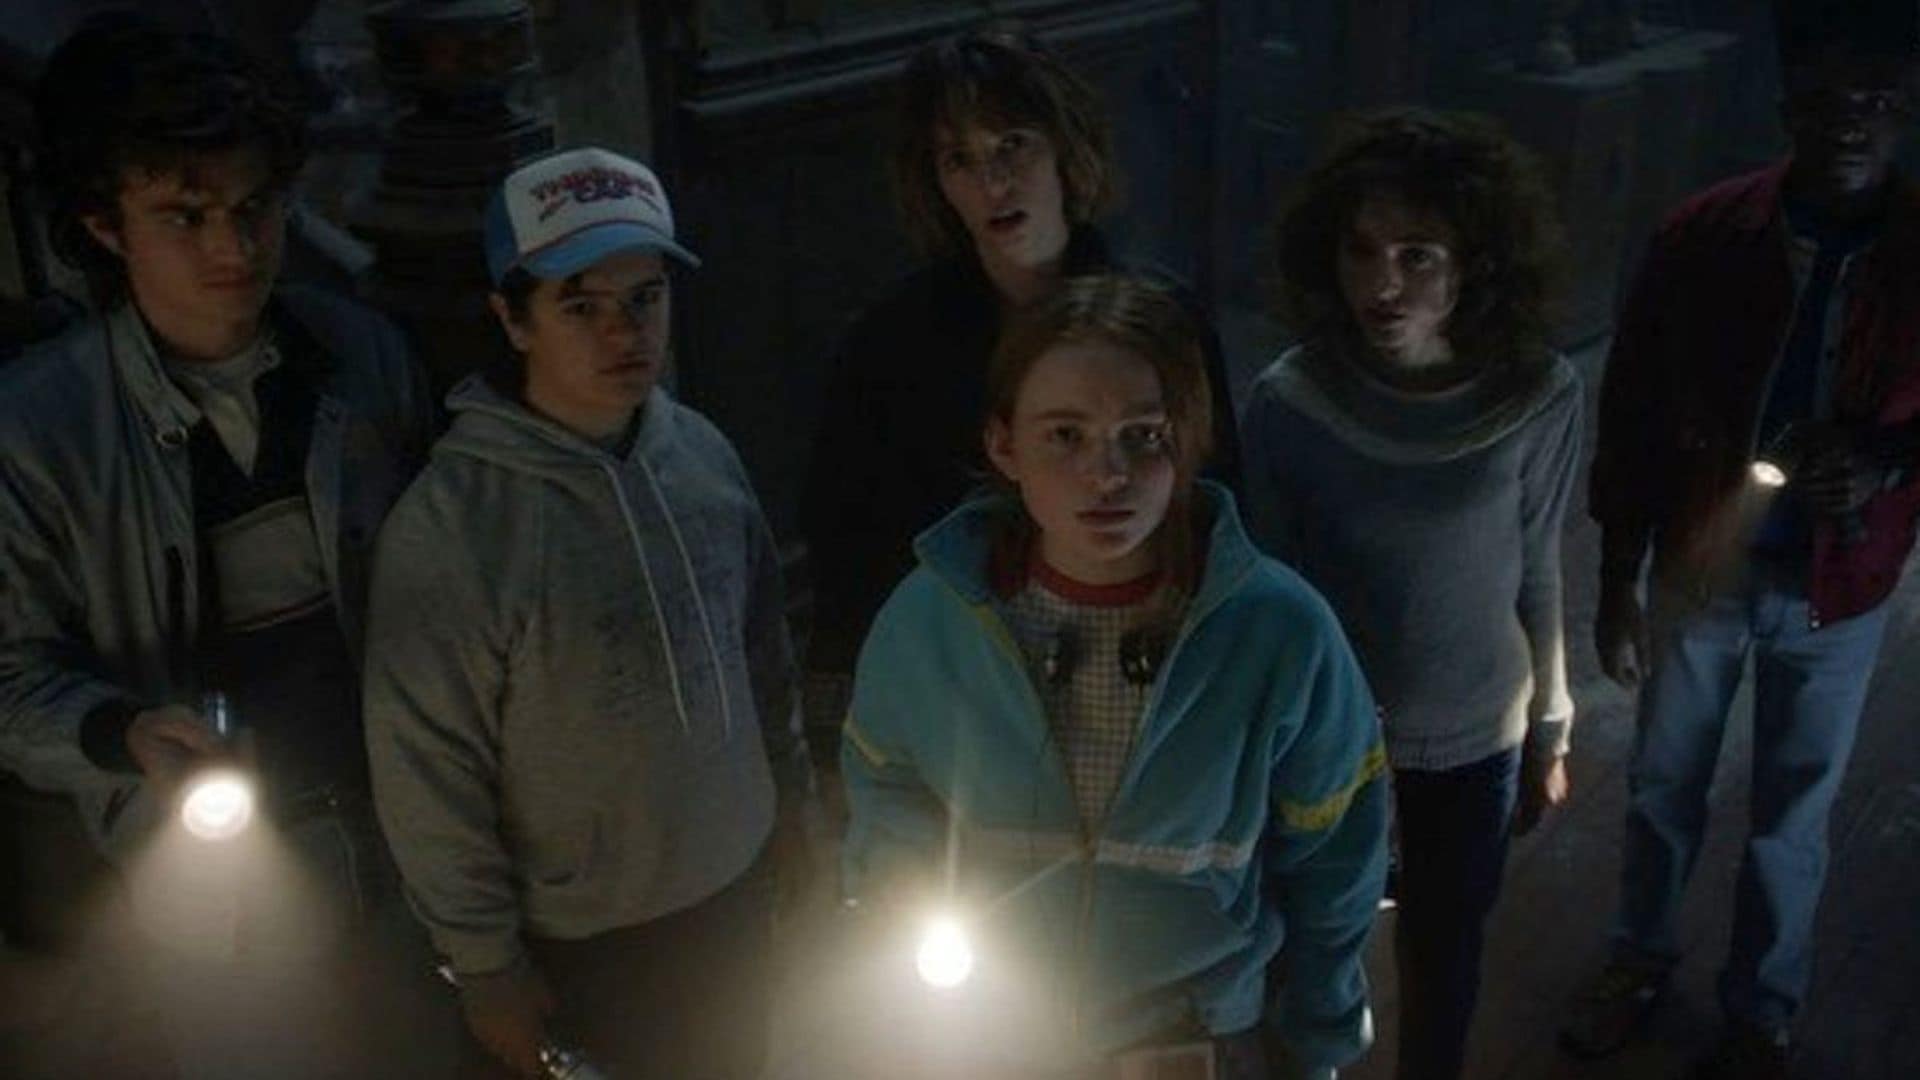 'Stranger Things' to return in 2022: Watch the new teaser